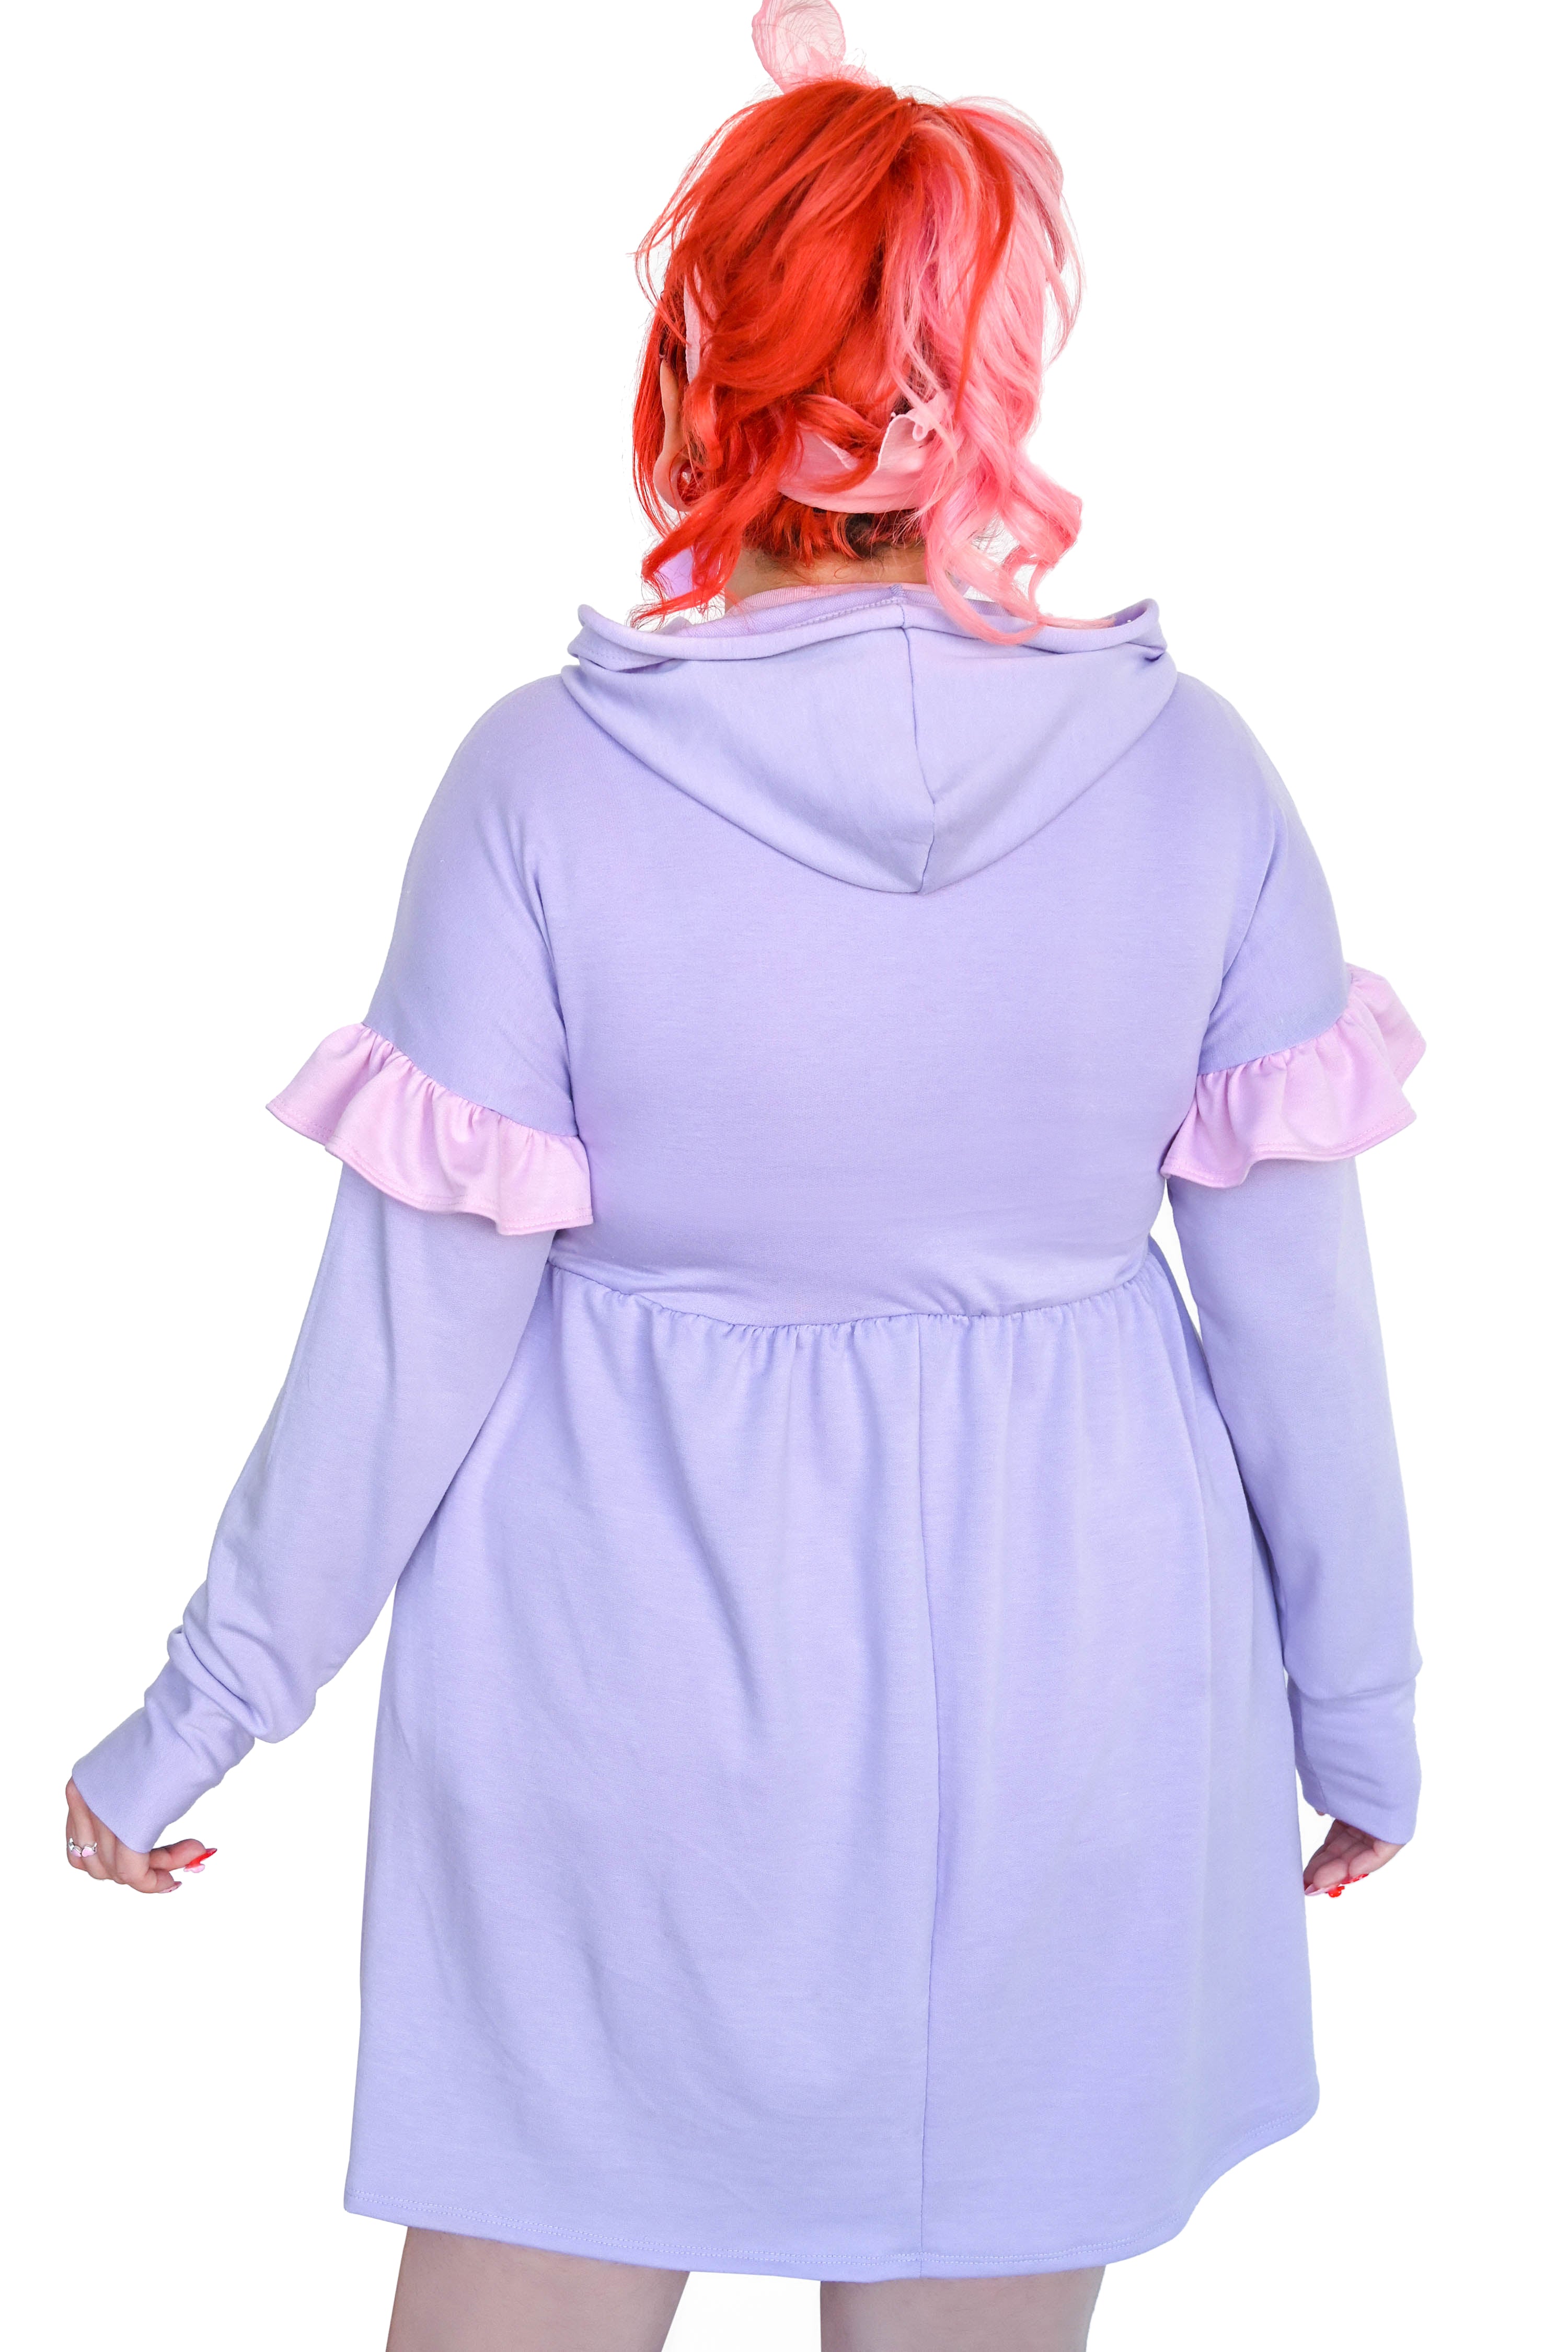 Sweetheart Hoodie Dress with Pockets - Sizes XS left!